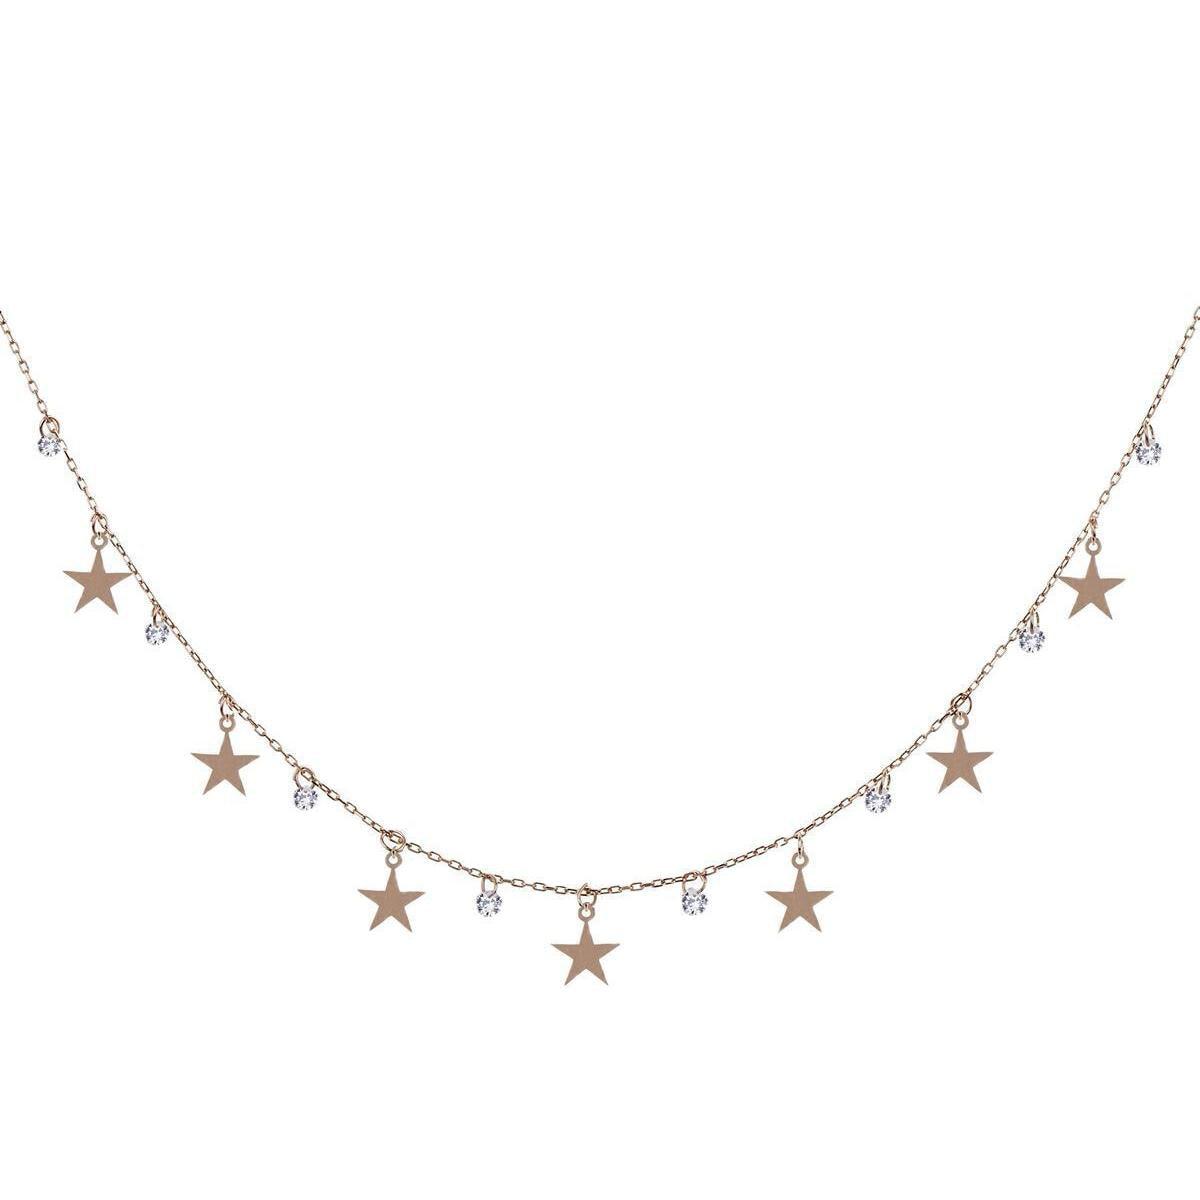 Diamond Star Satellite Chain Necklace • Diamond Star Necklace - Trending Silver Gifts